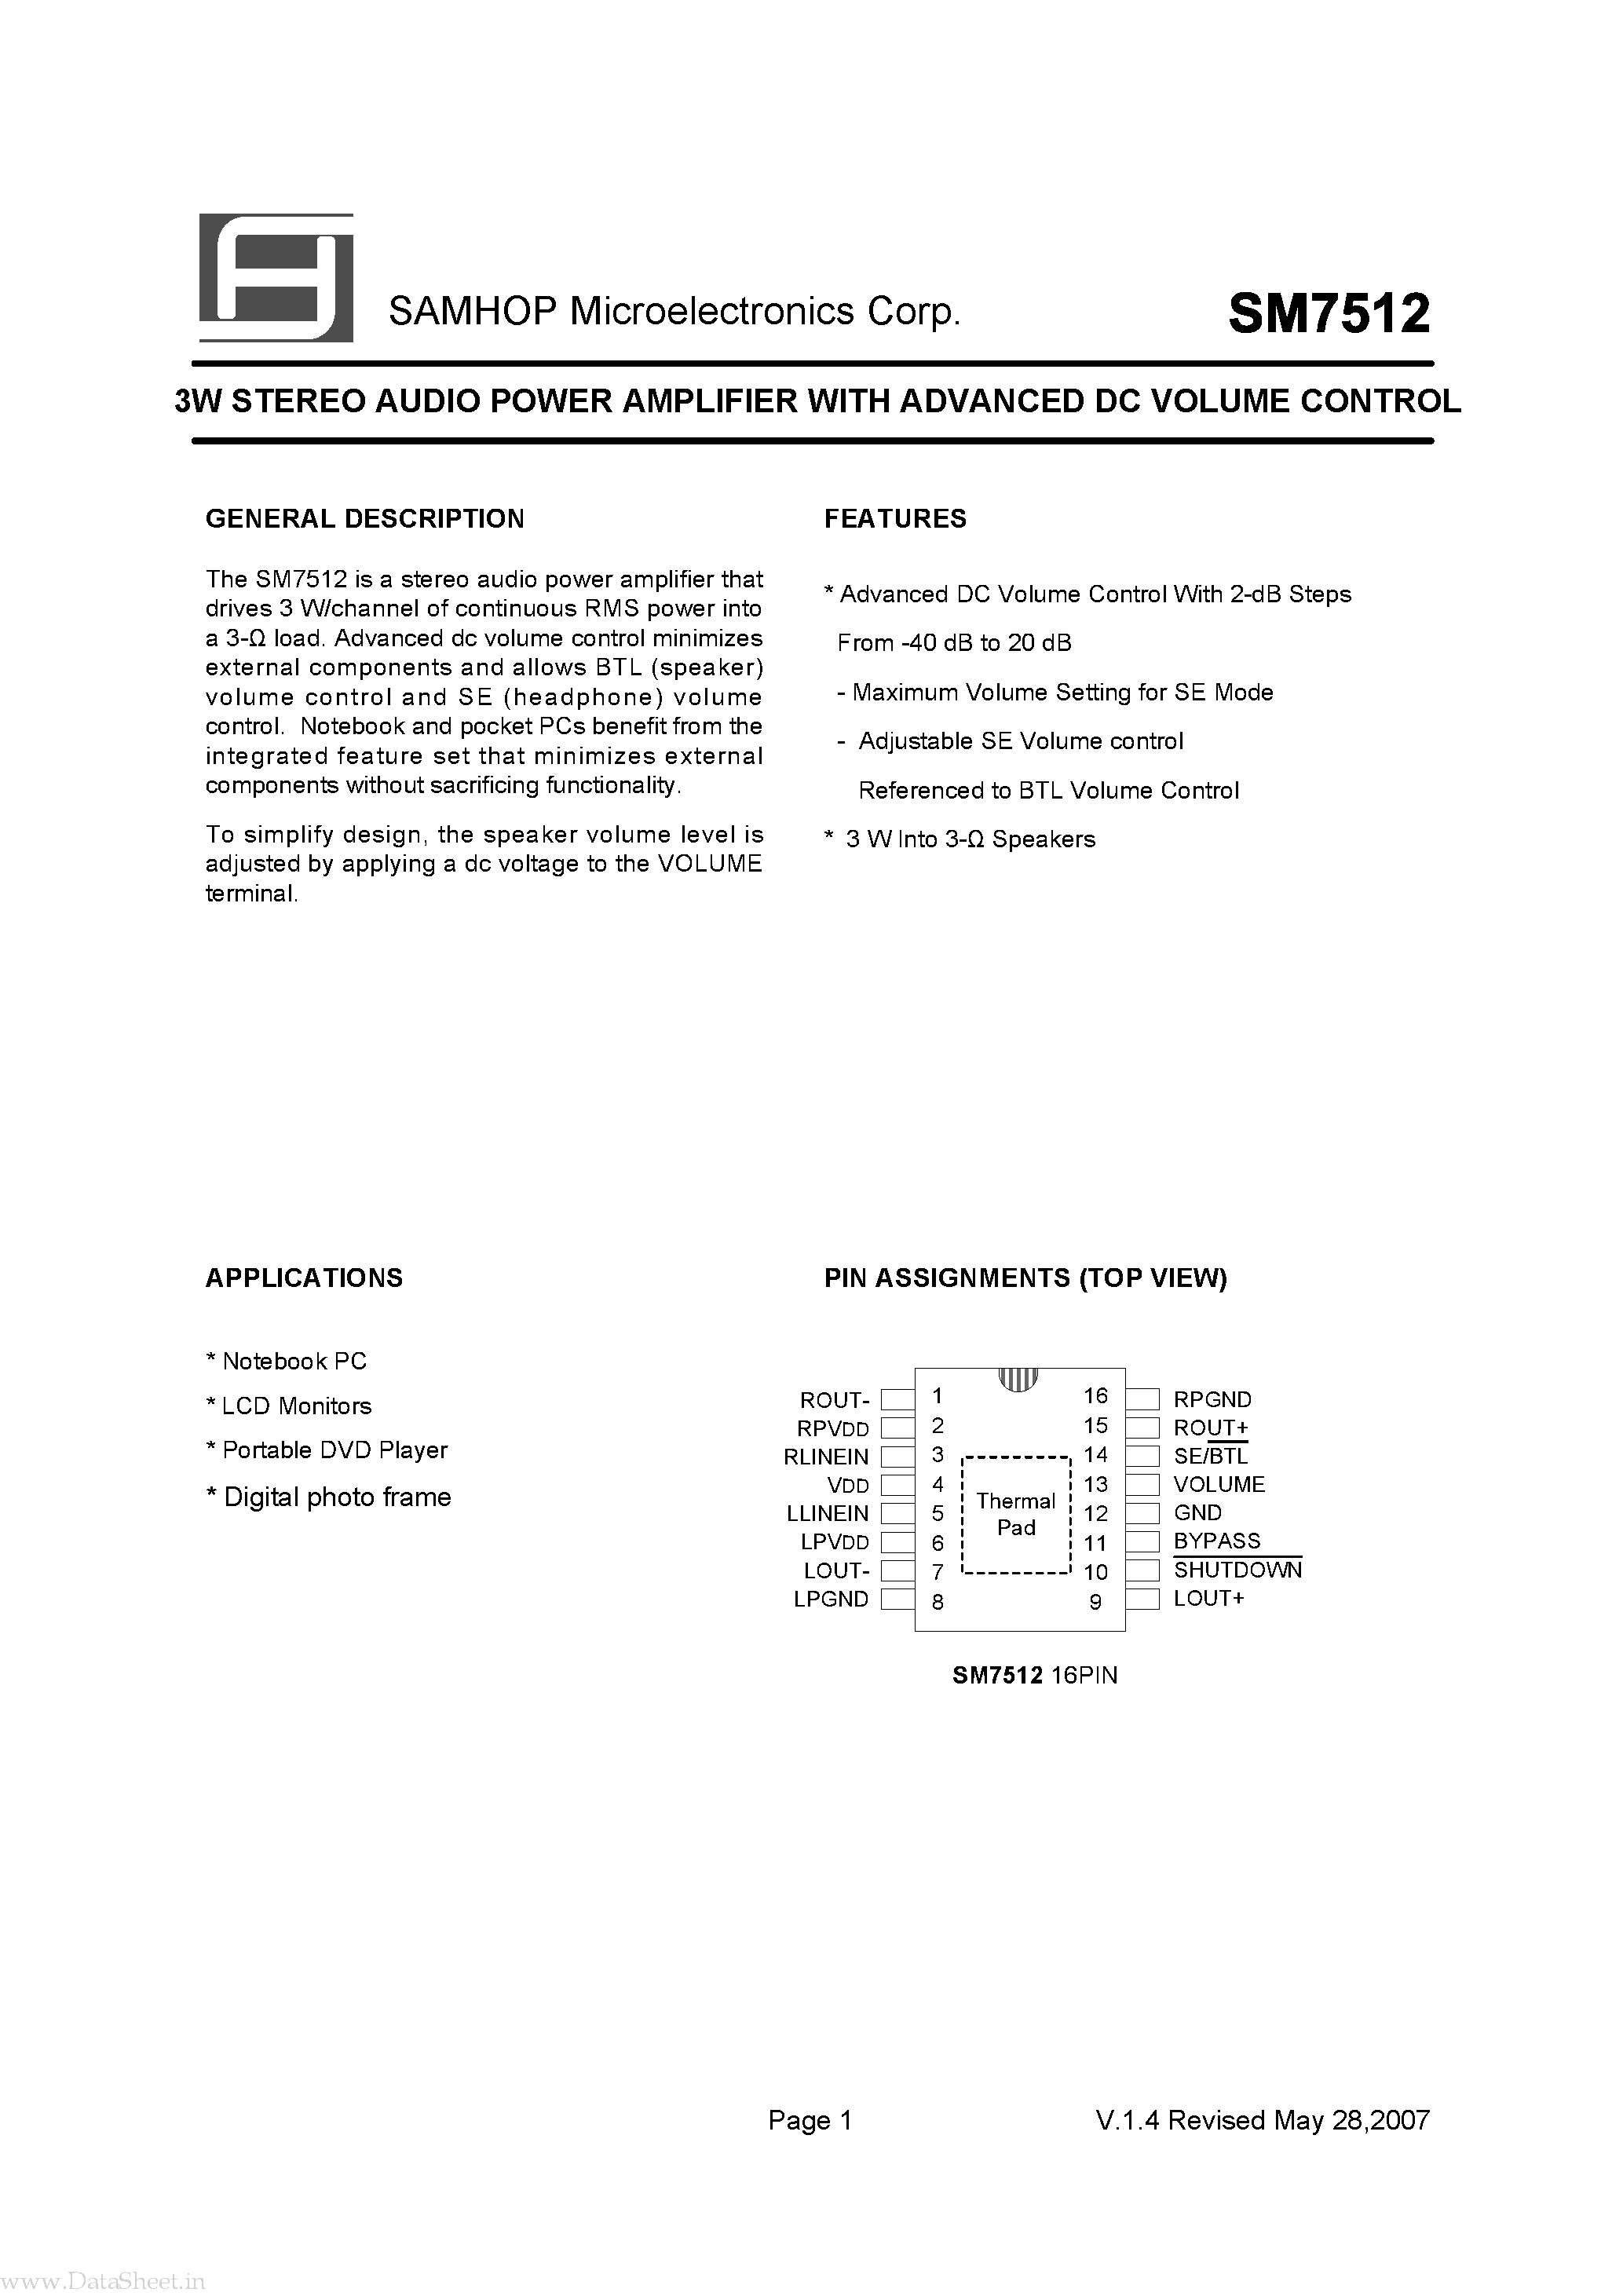 Datasheet SM7512 - 3W STEREO AUDIO POWER AMPLIFIER page 2